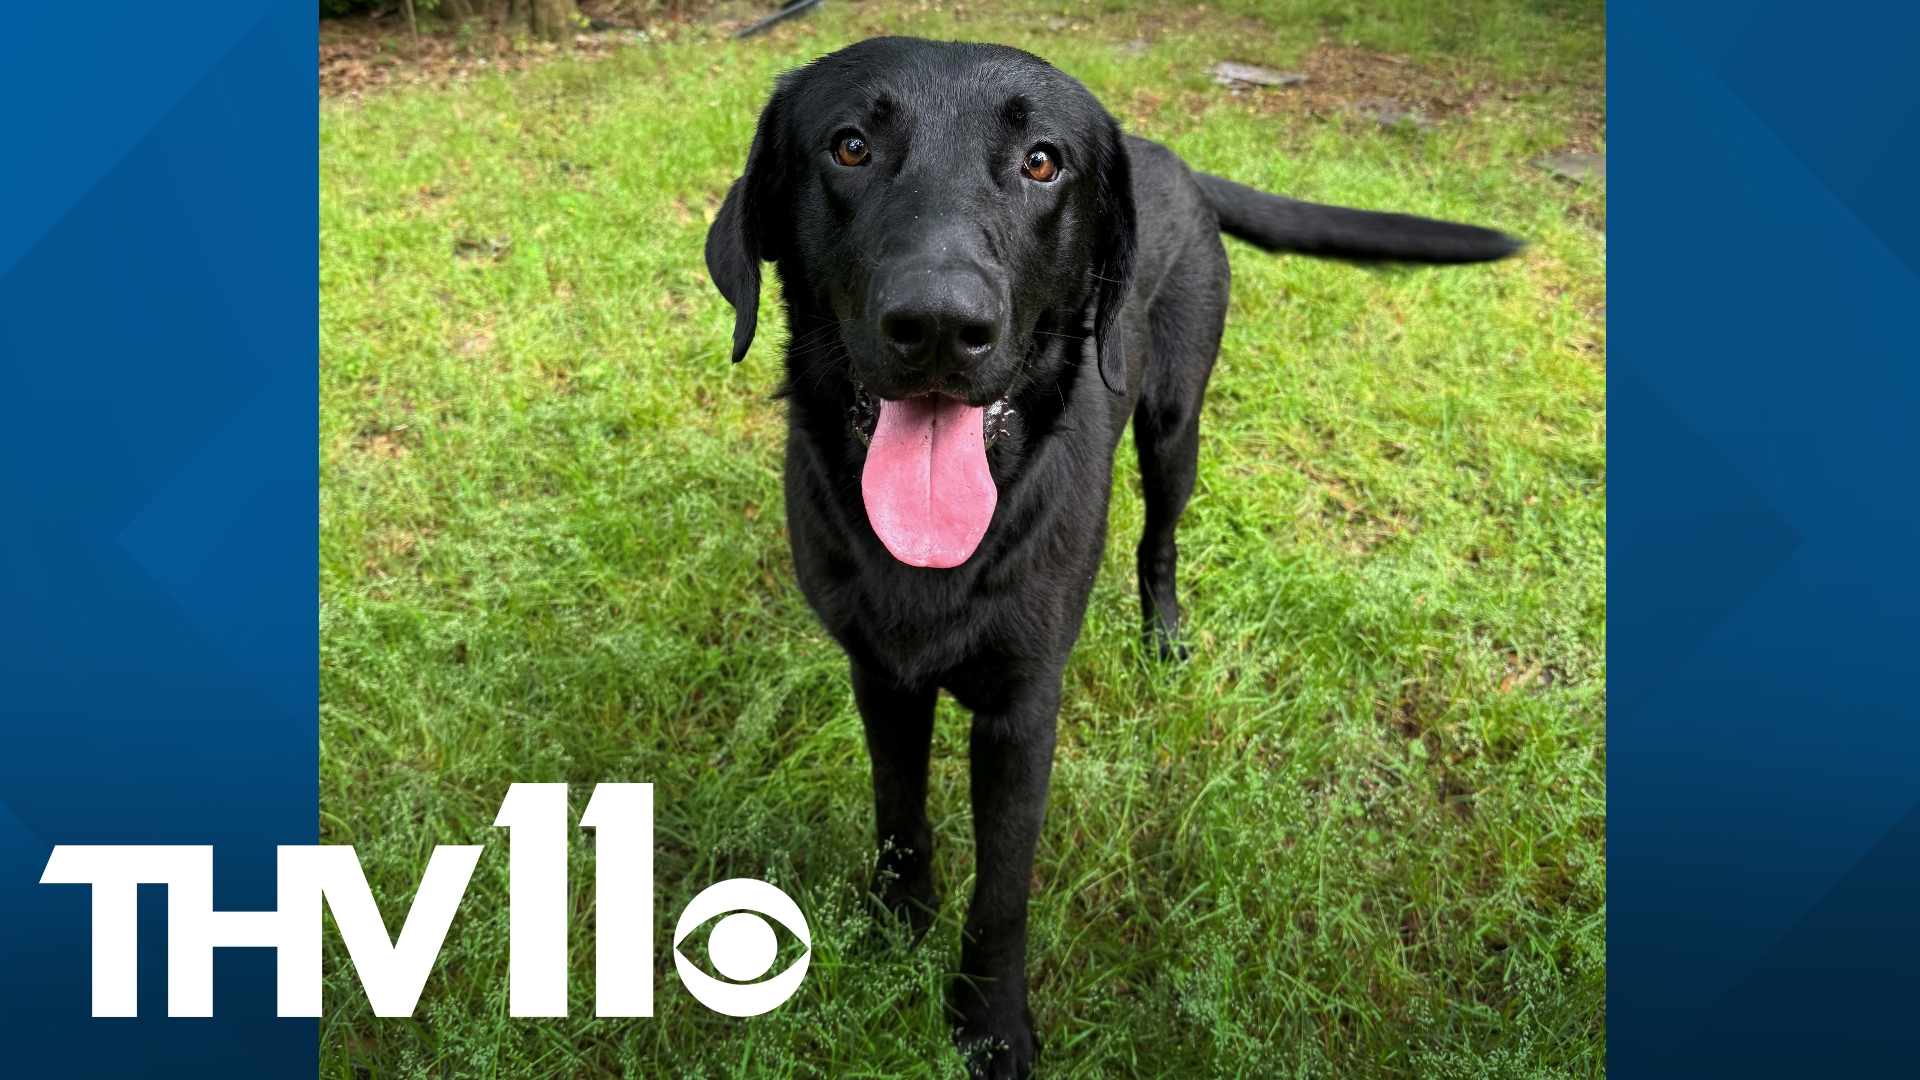 Zorro is a young black lab who is as gentle as he is big. Visit the Little Rock Animal Village to help this smart boy find a loving home of his own!